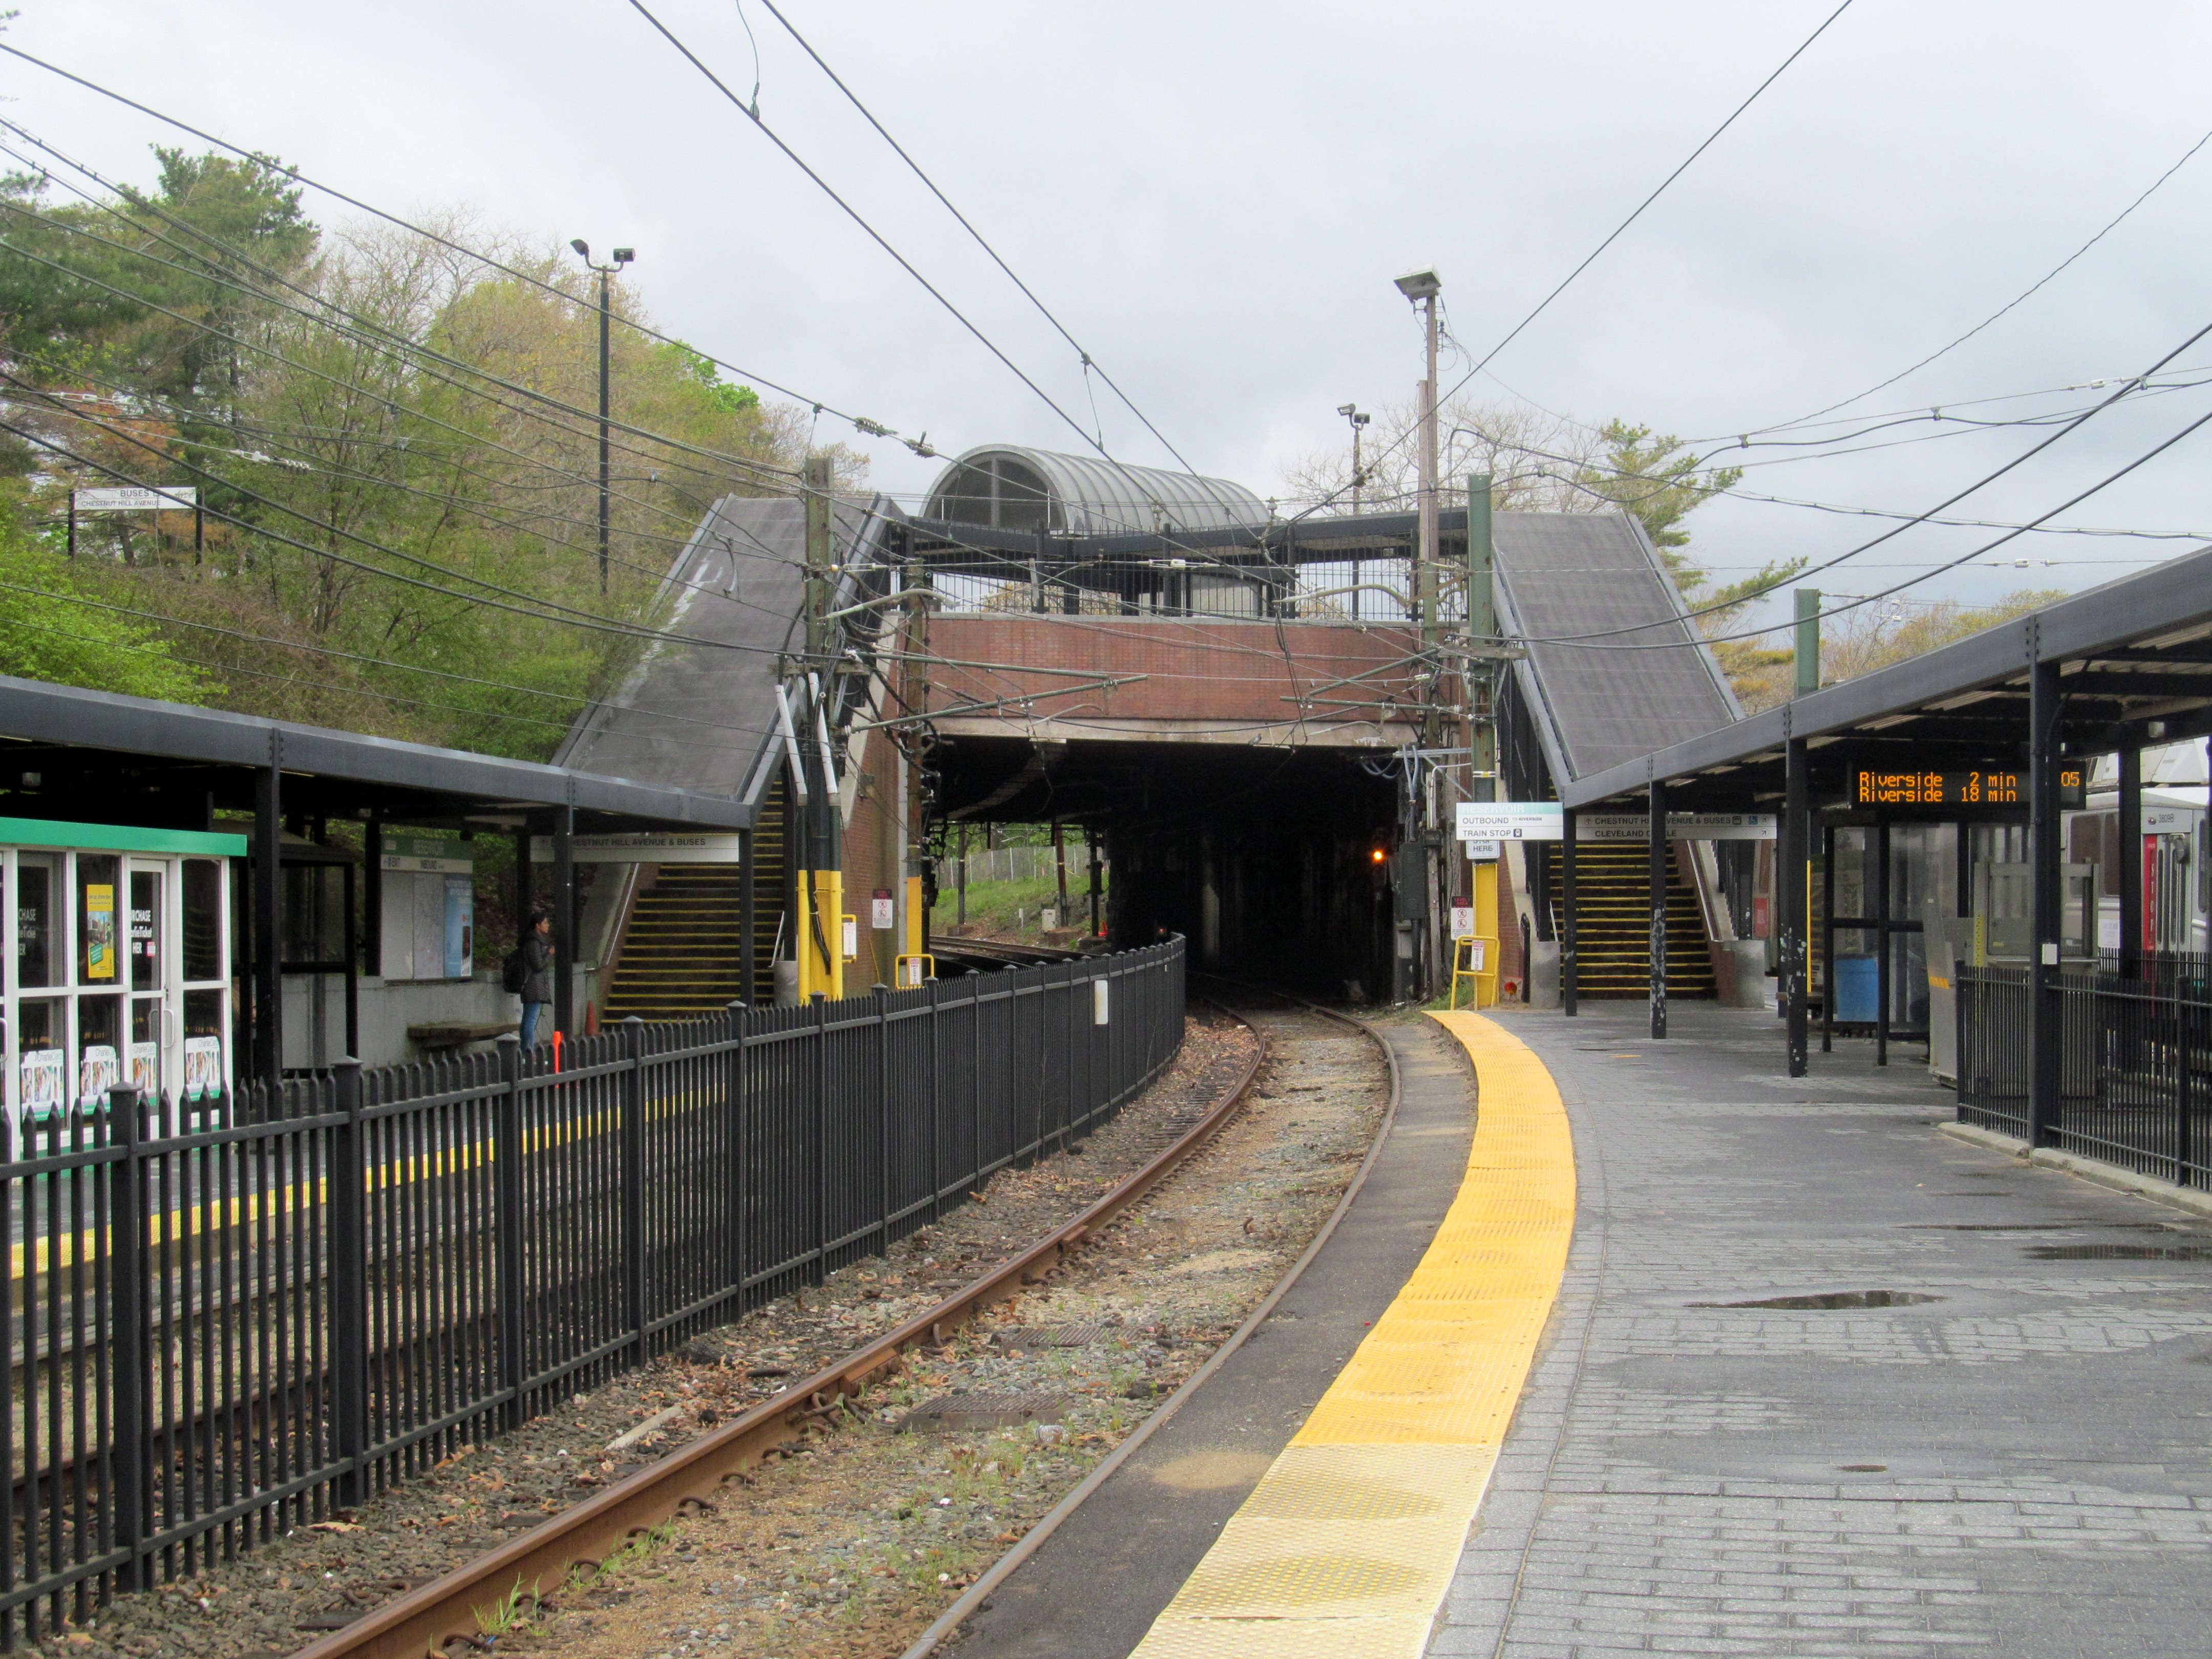 File:Reservoir station facing outbound, May 2016.JPG - Wikimedia Commons